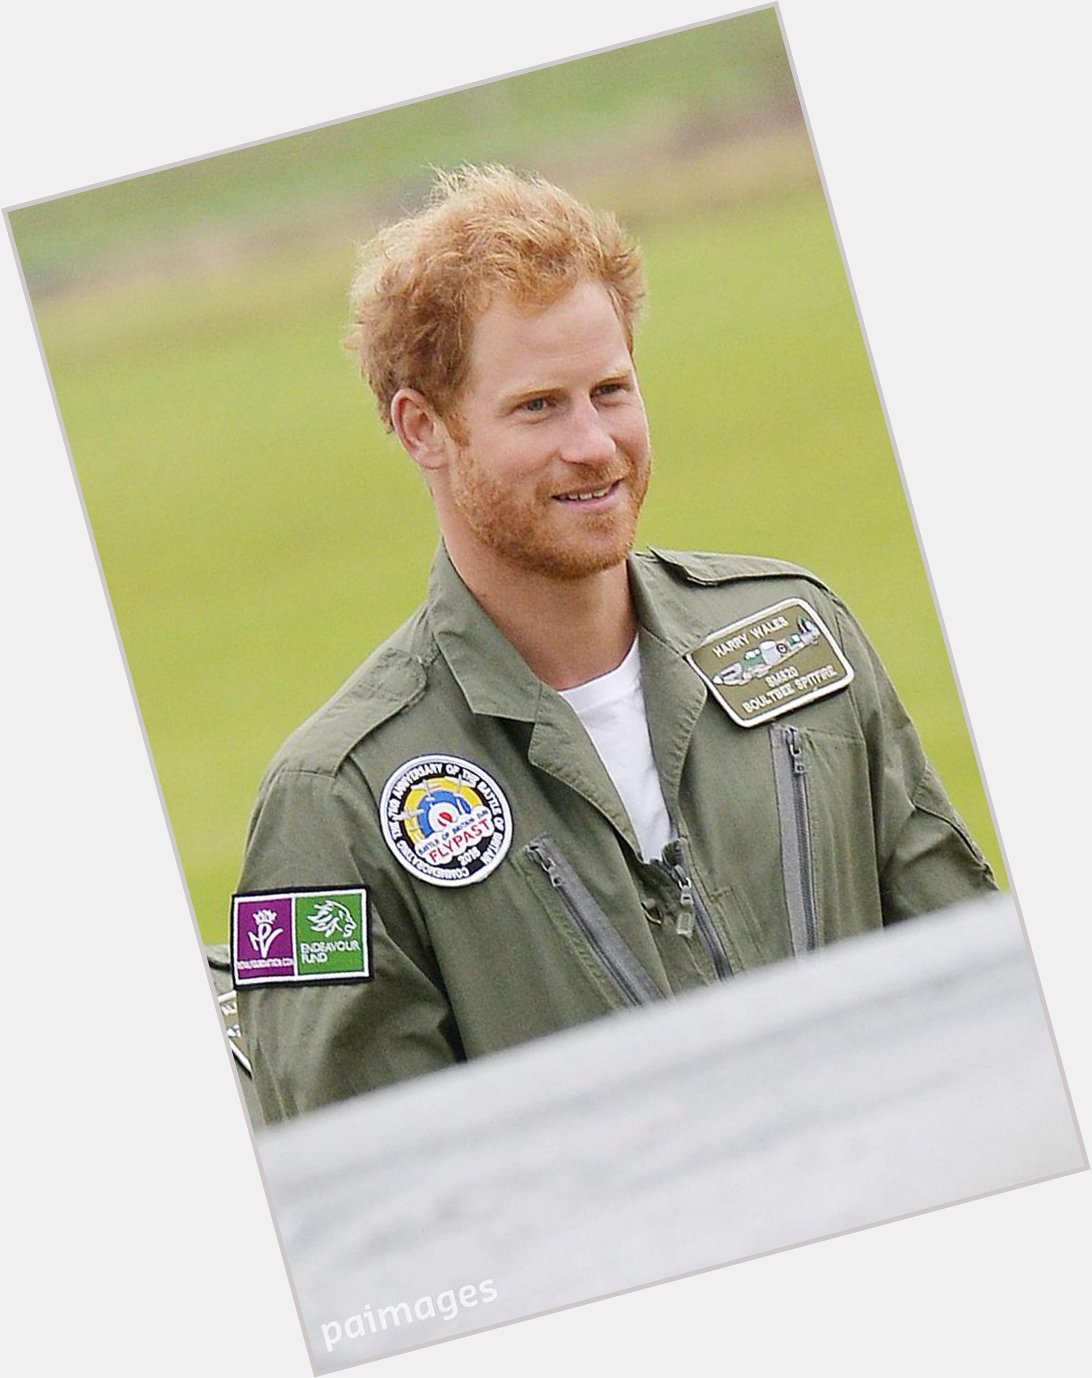 Wishing  Prince Harry   Happy Birthday  beard suite him more long may the beard  reign 